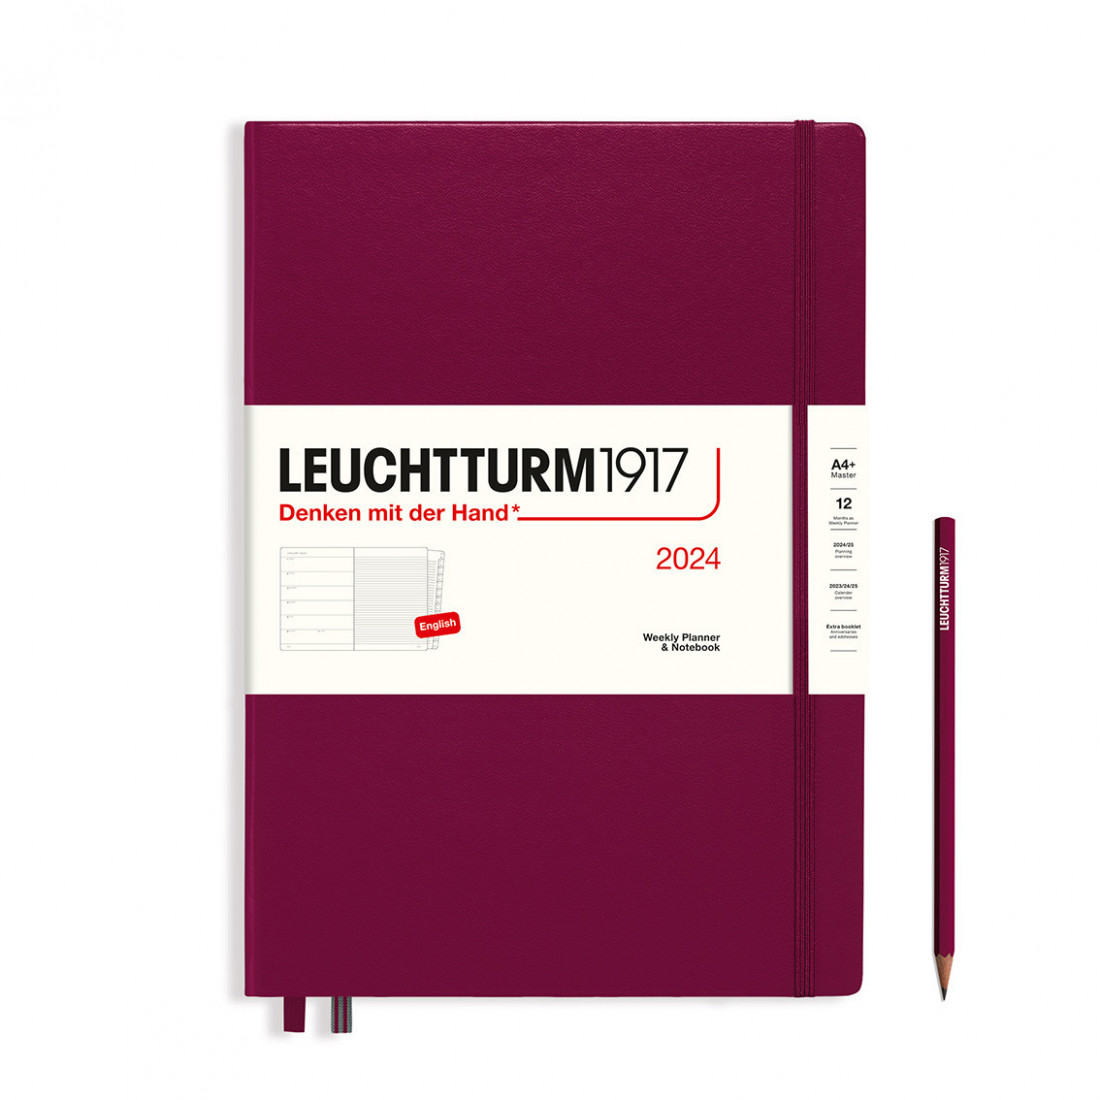 Leuchtturm 1917 Weekly Planner and Notebook 2024 Port Red Master A4 Plus Hard Cover